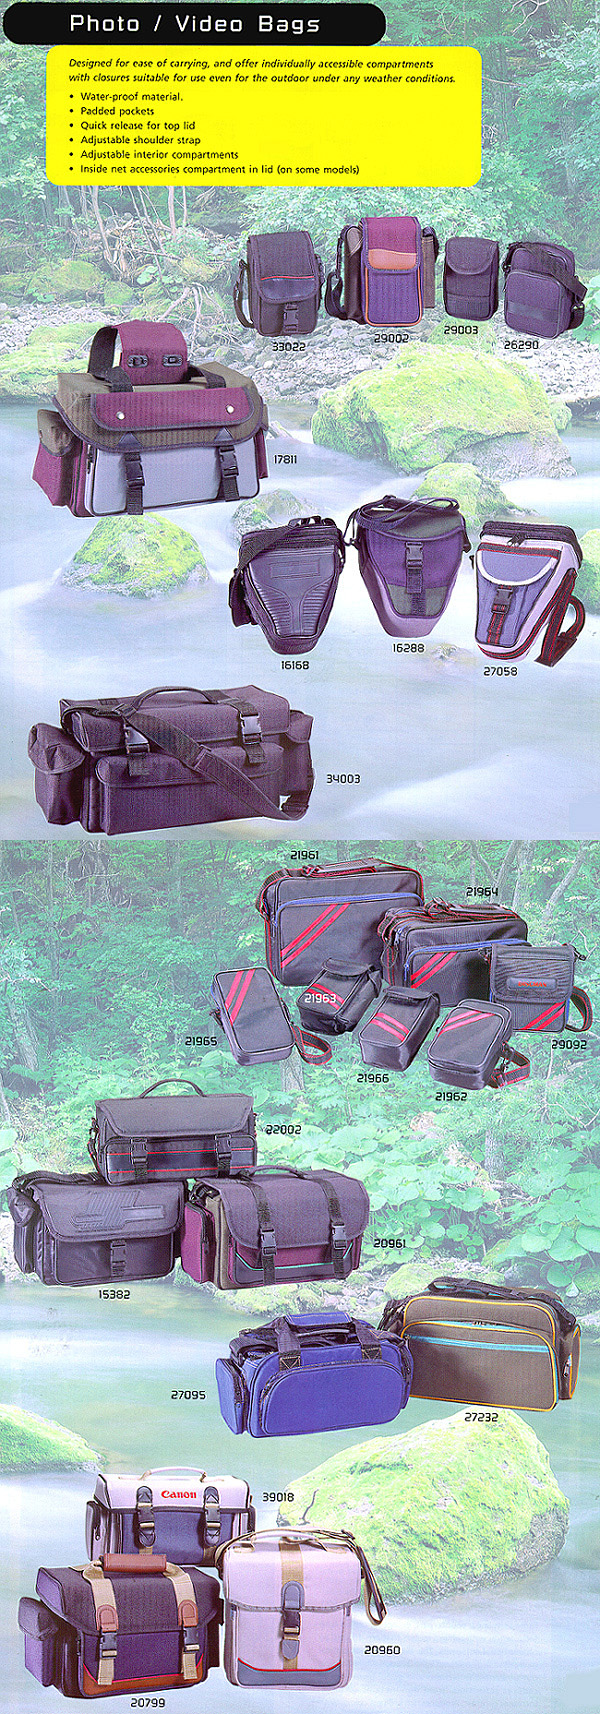 Photo / Video Bags